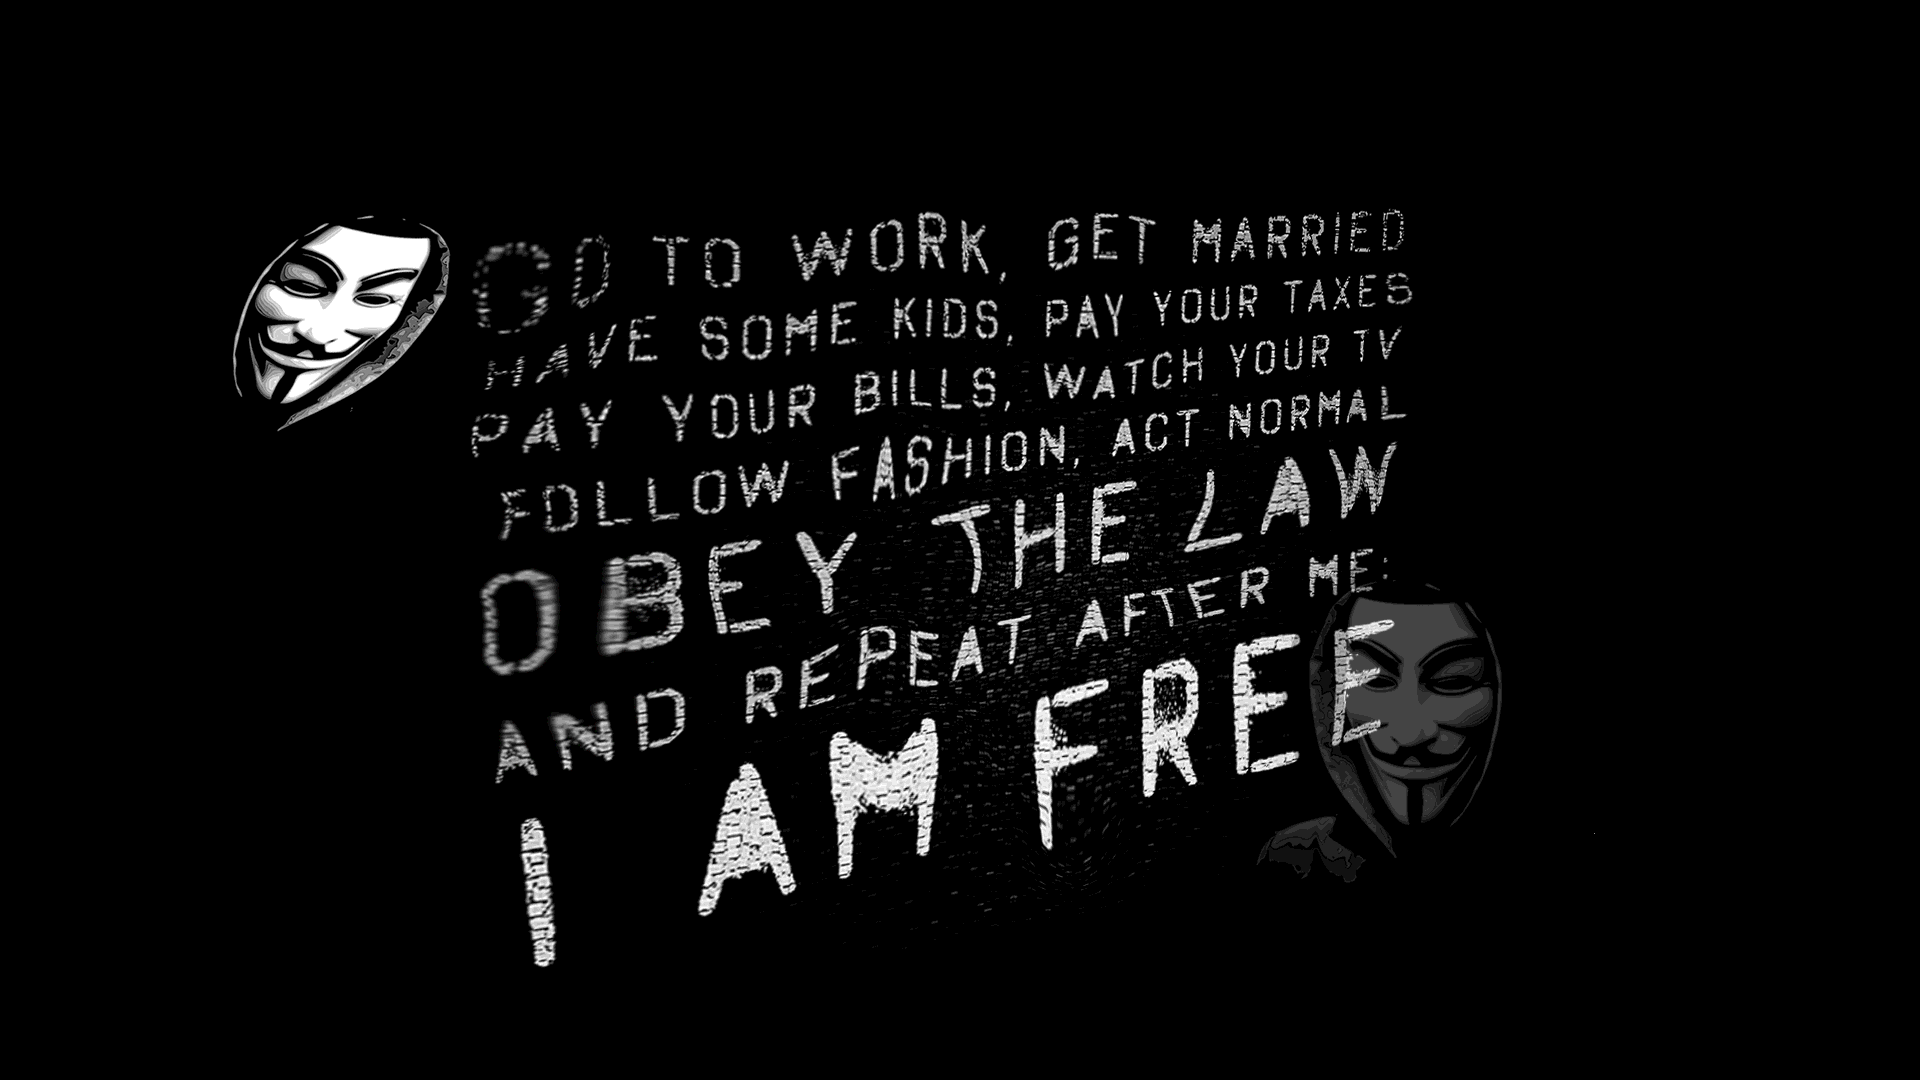 anonymous-freedom-speech-quote-hd-wallpaper-1920x1080-5481.gif